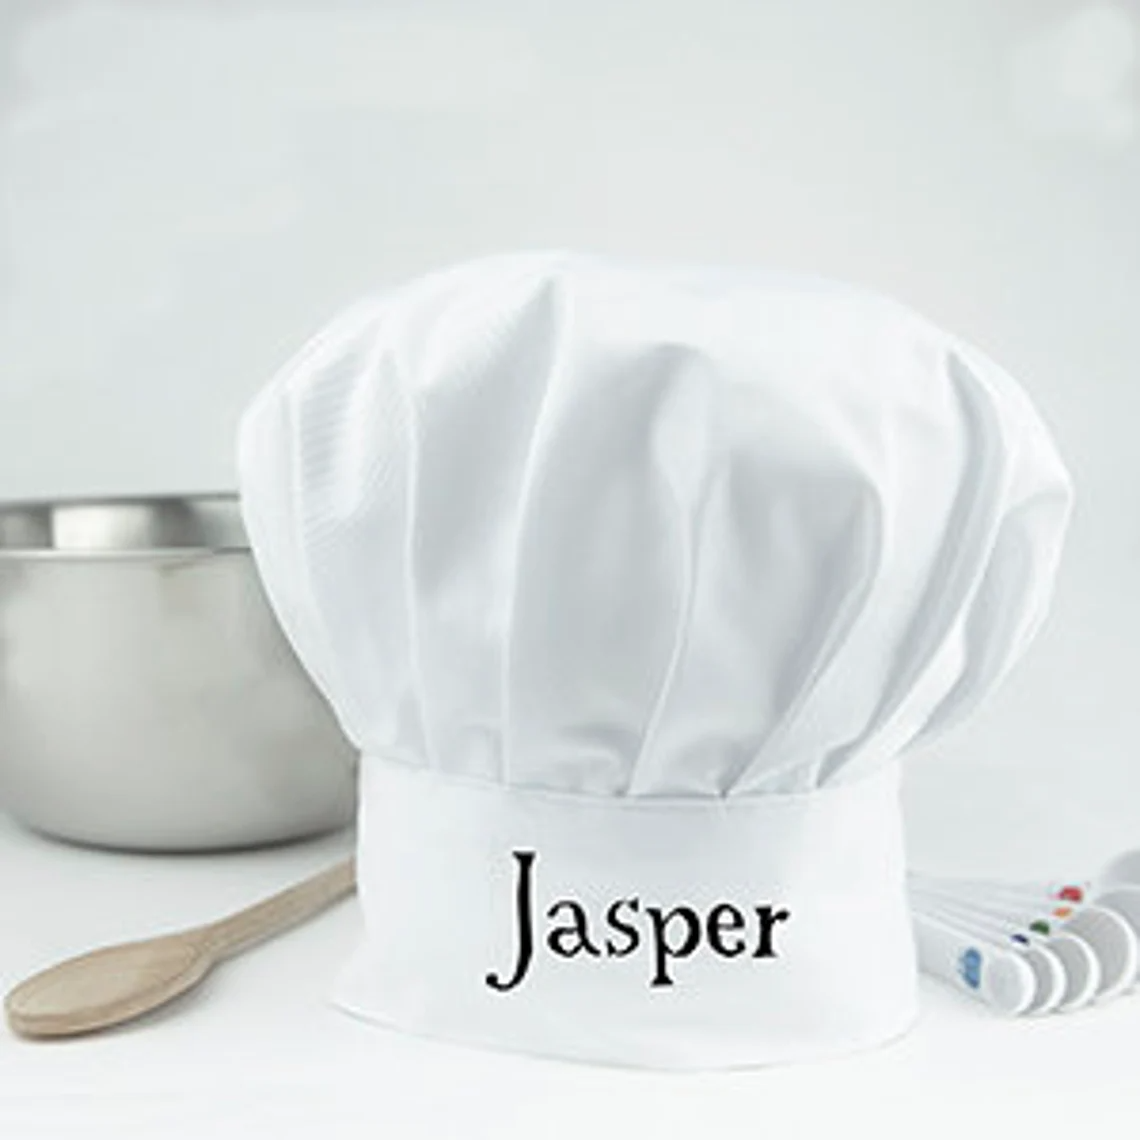 Personalised Chef's Hat Printed With Any Text You Want Unisex Chefs Hat Great Gift This Christmas Make An Even Better Fathers Day Present